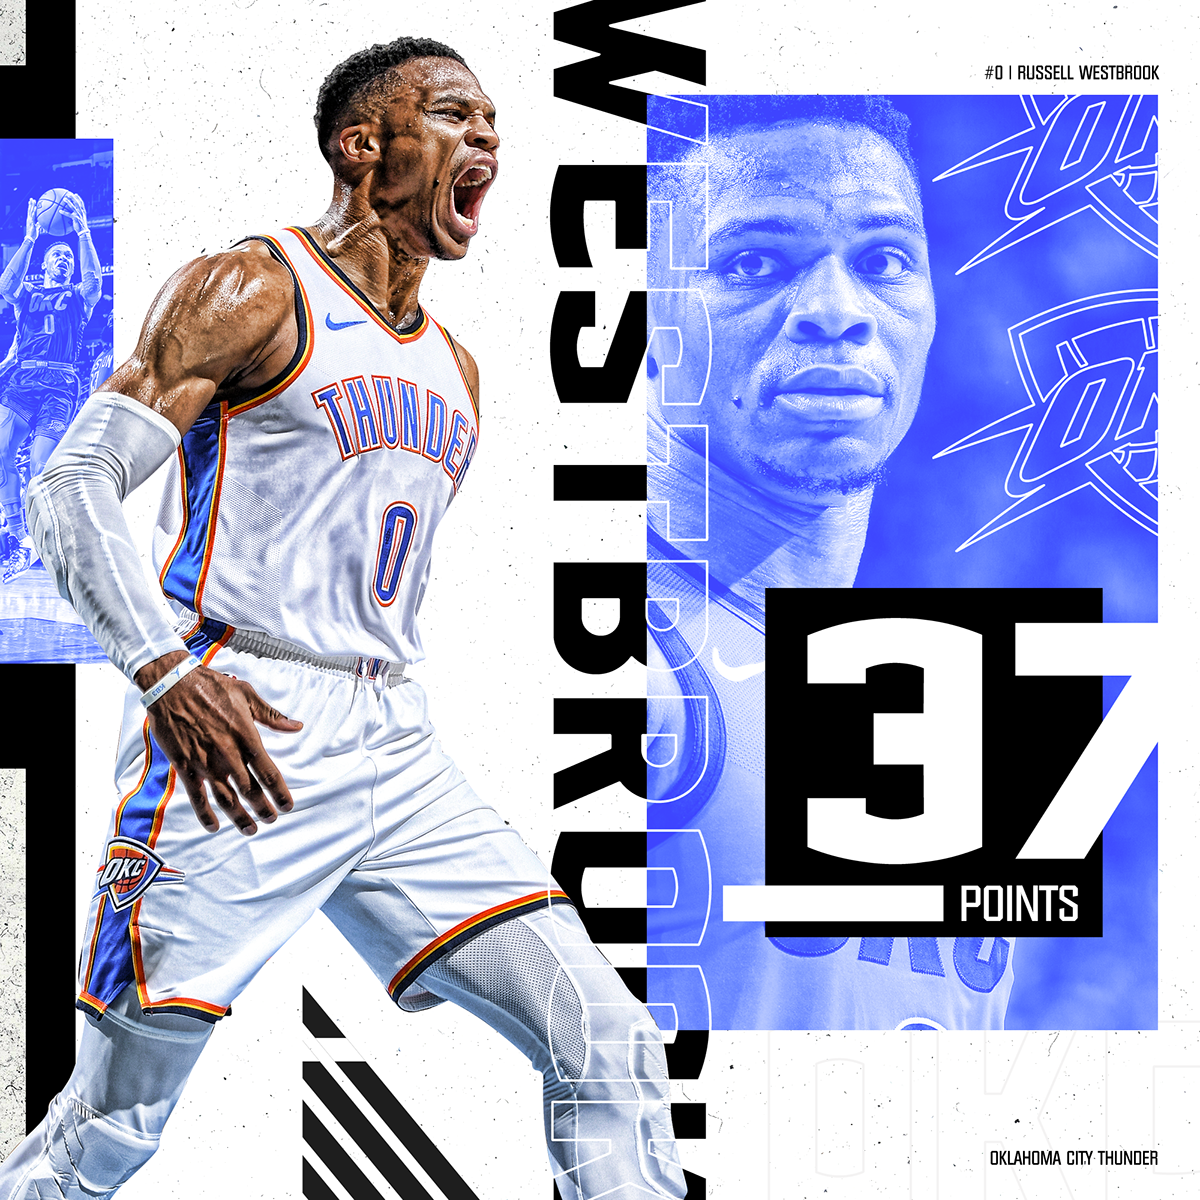 Players Only NBA on TNT James Harden NBA basketball NBA Basketball SMSports SMSportsdesign Russell Westbrook